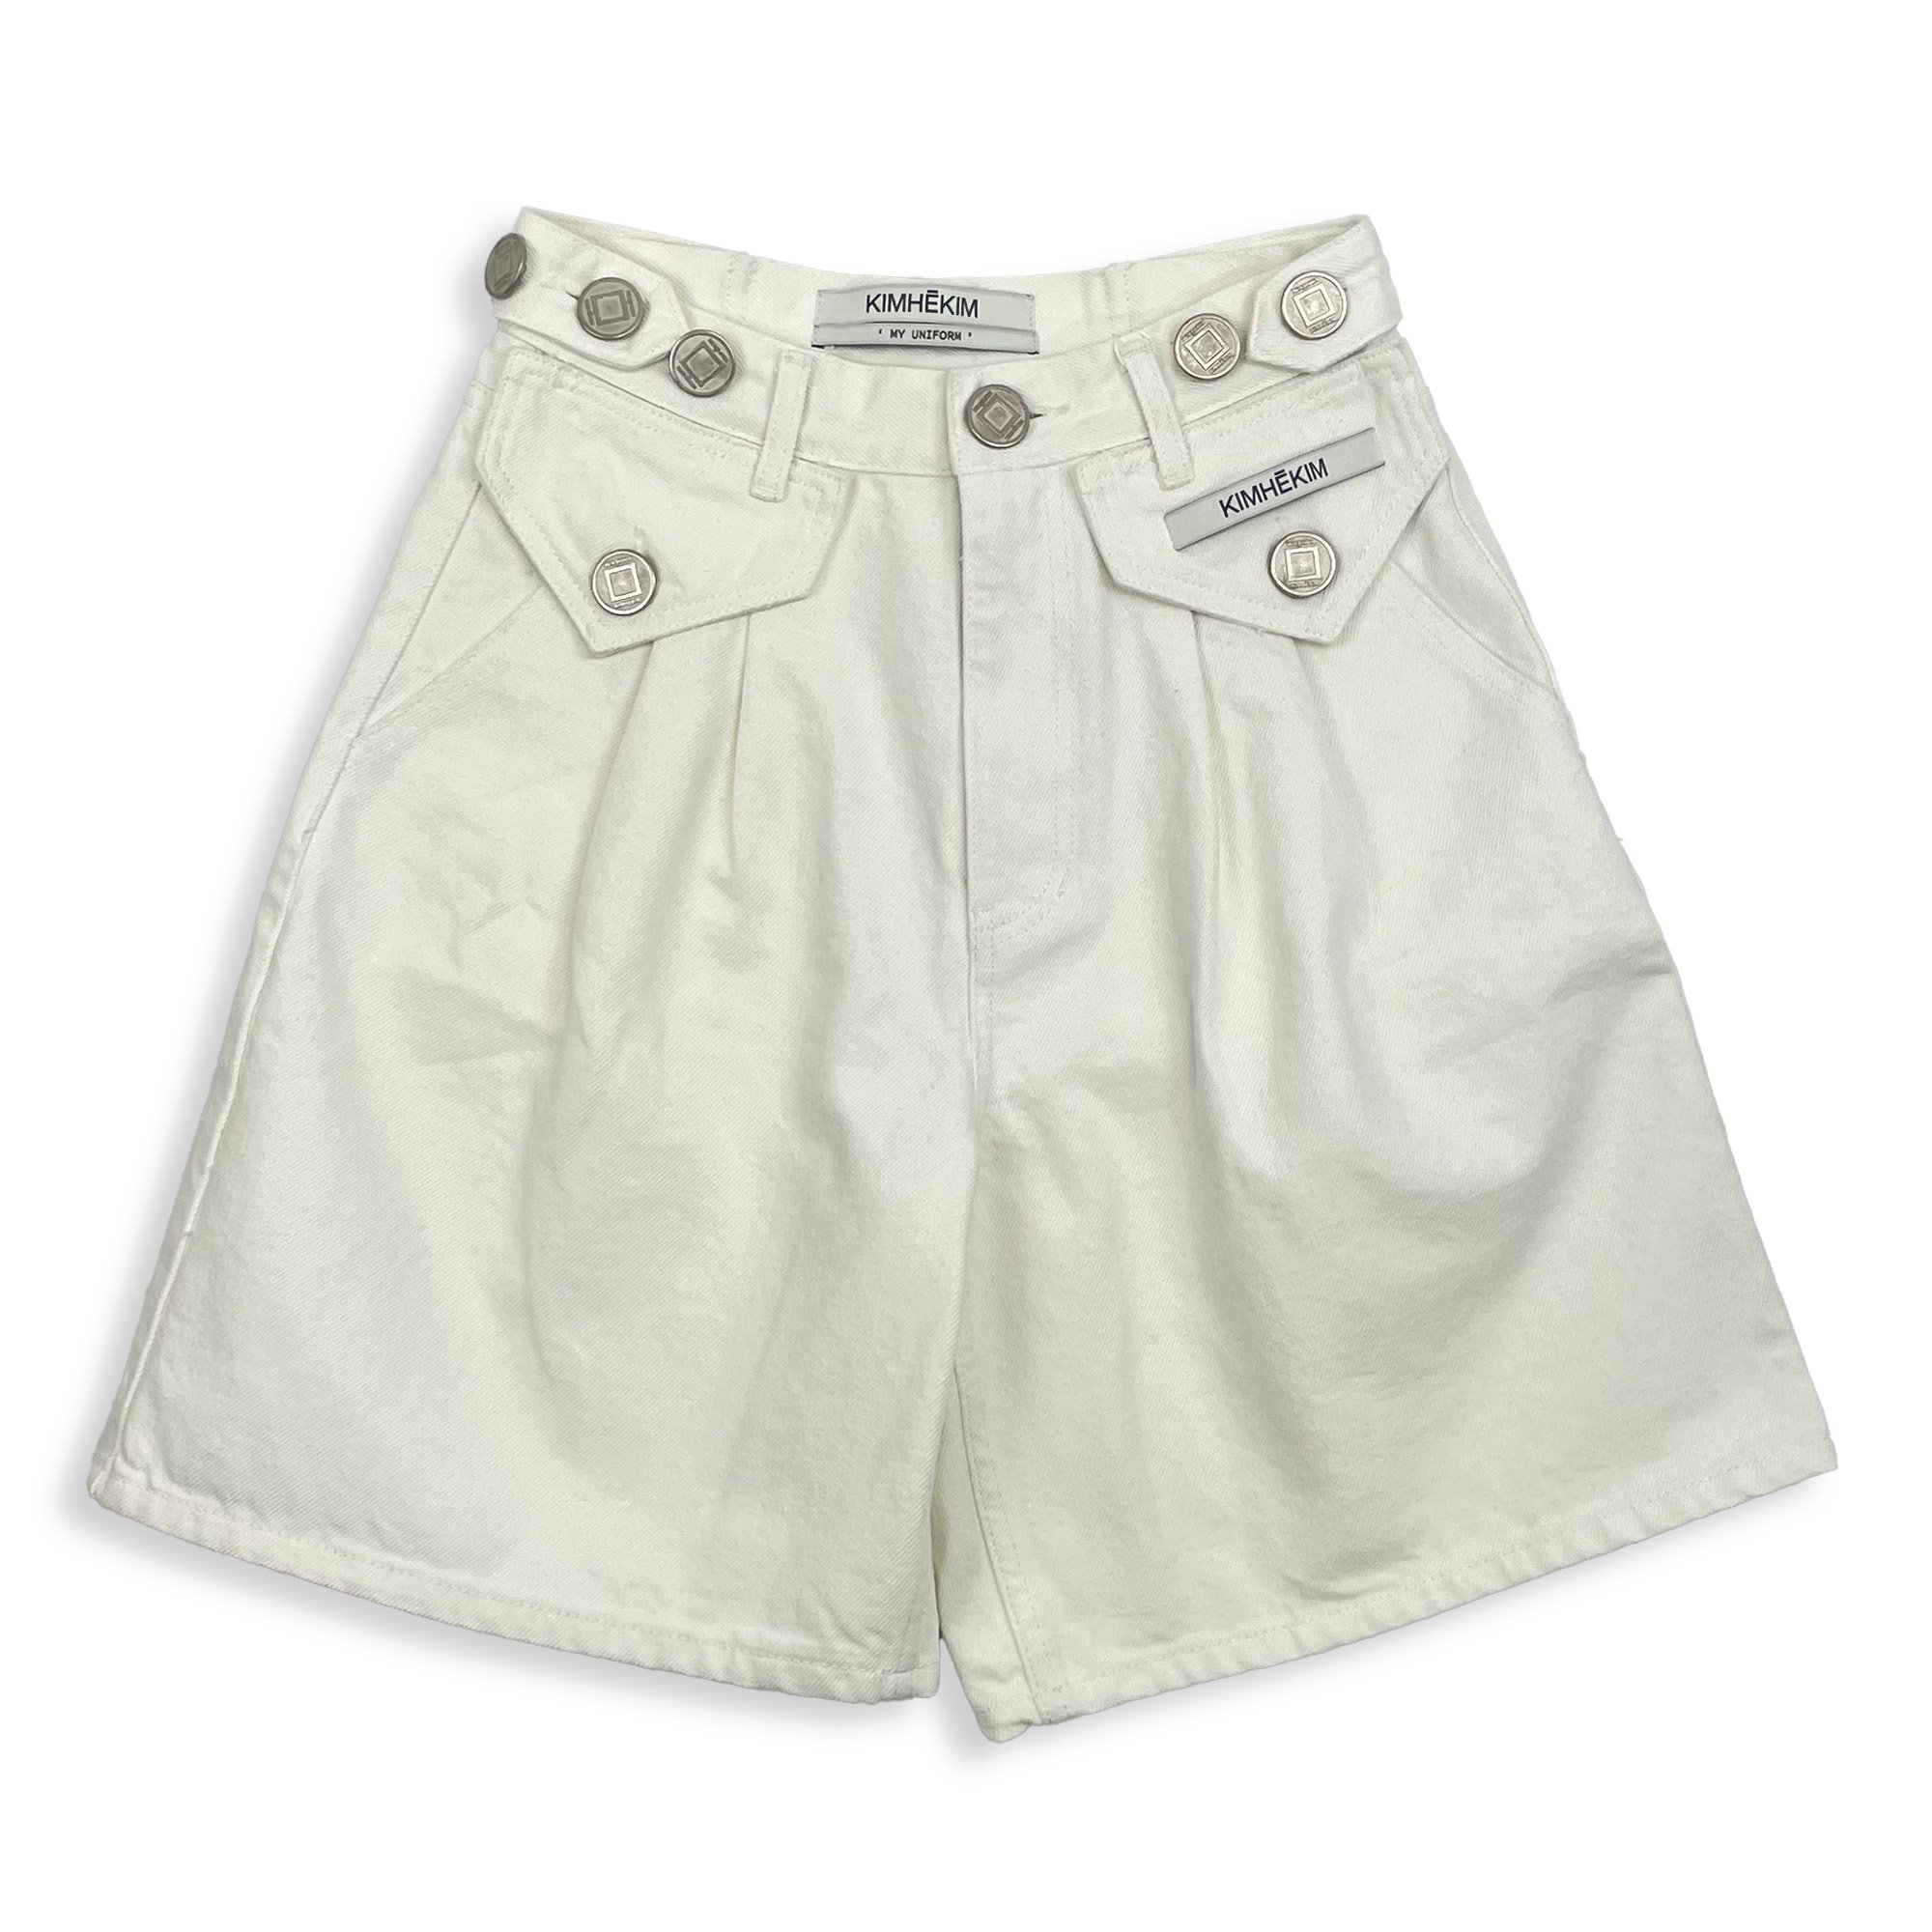 <img class='new_mark_img1' src='https://img.shop-pro.jp/img/new/icons7.gif' style='border:none;display:inline;margin:0px;padding:0px;width:auto;' />KIMHEKIM TWO POCKET PANTS